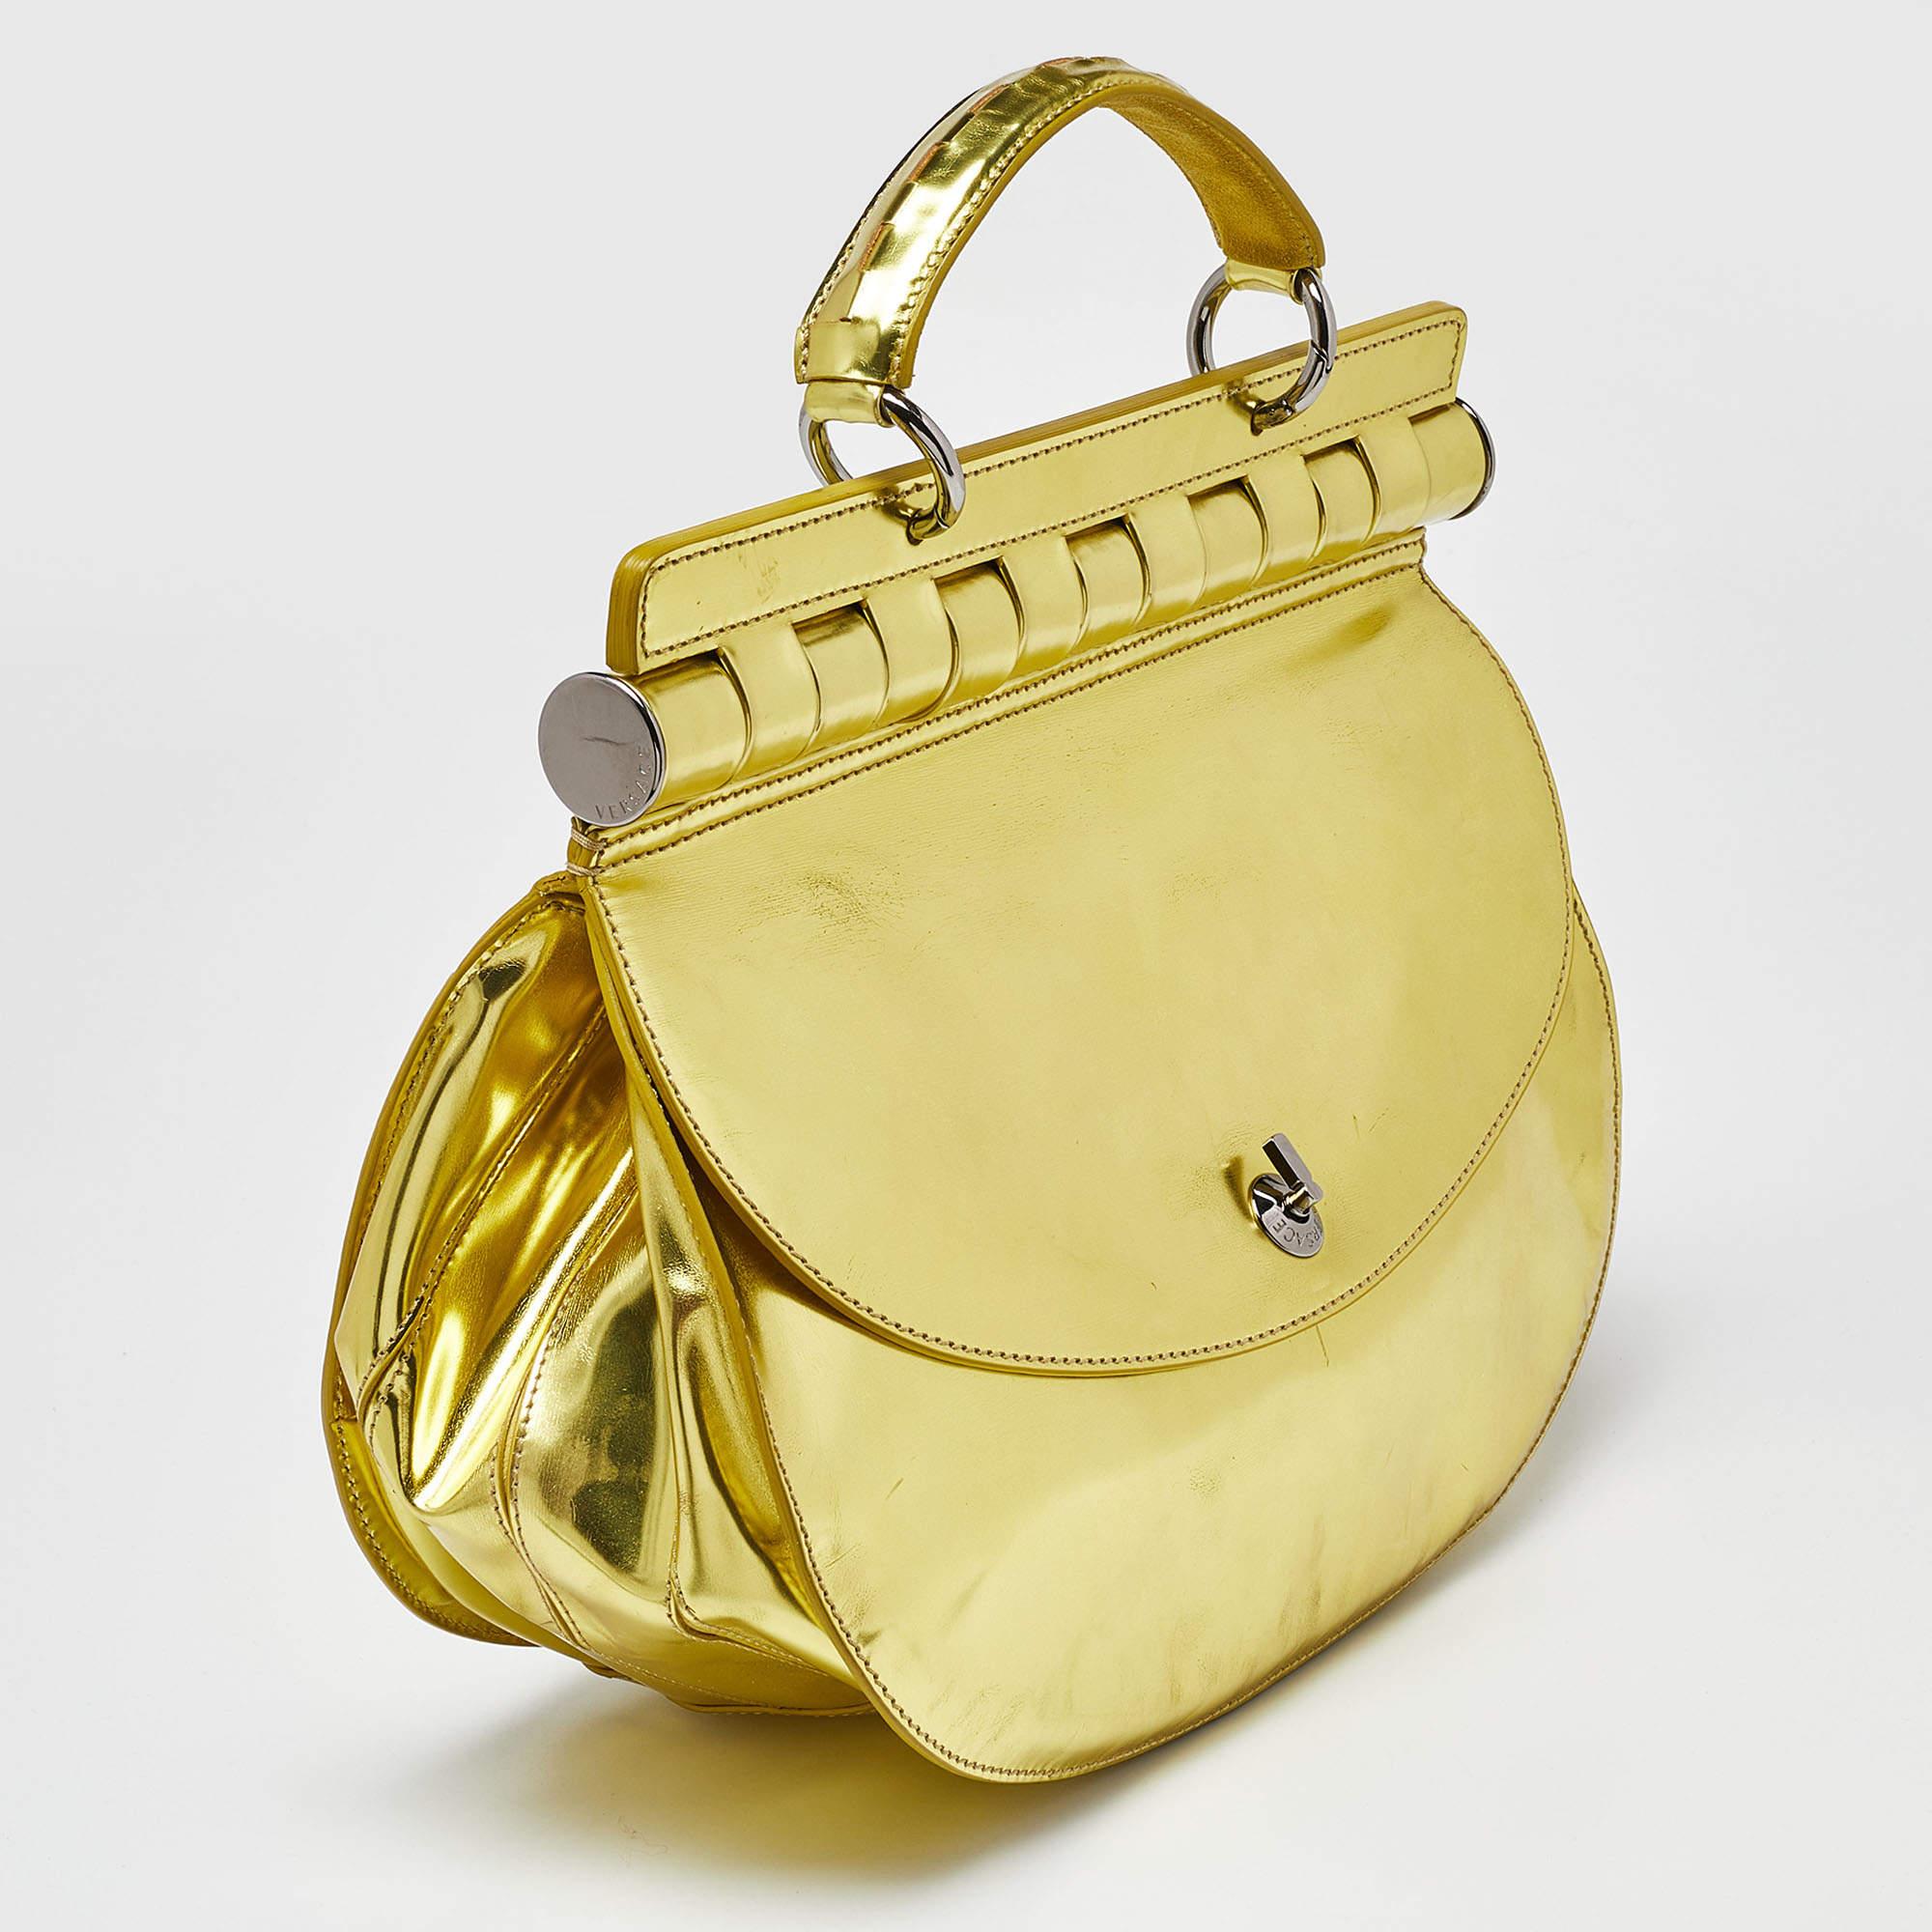 Indulge in timeless luxury with this Versace bag for women. Meticulously crafted, this exquisite accessory embodies elegance, functionality, and style, making it the ultimate companion for every sophisticated woman.

